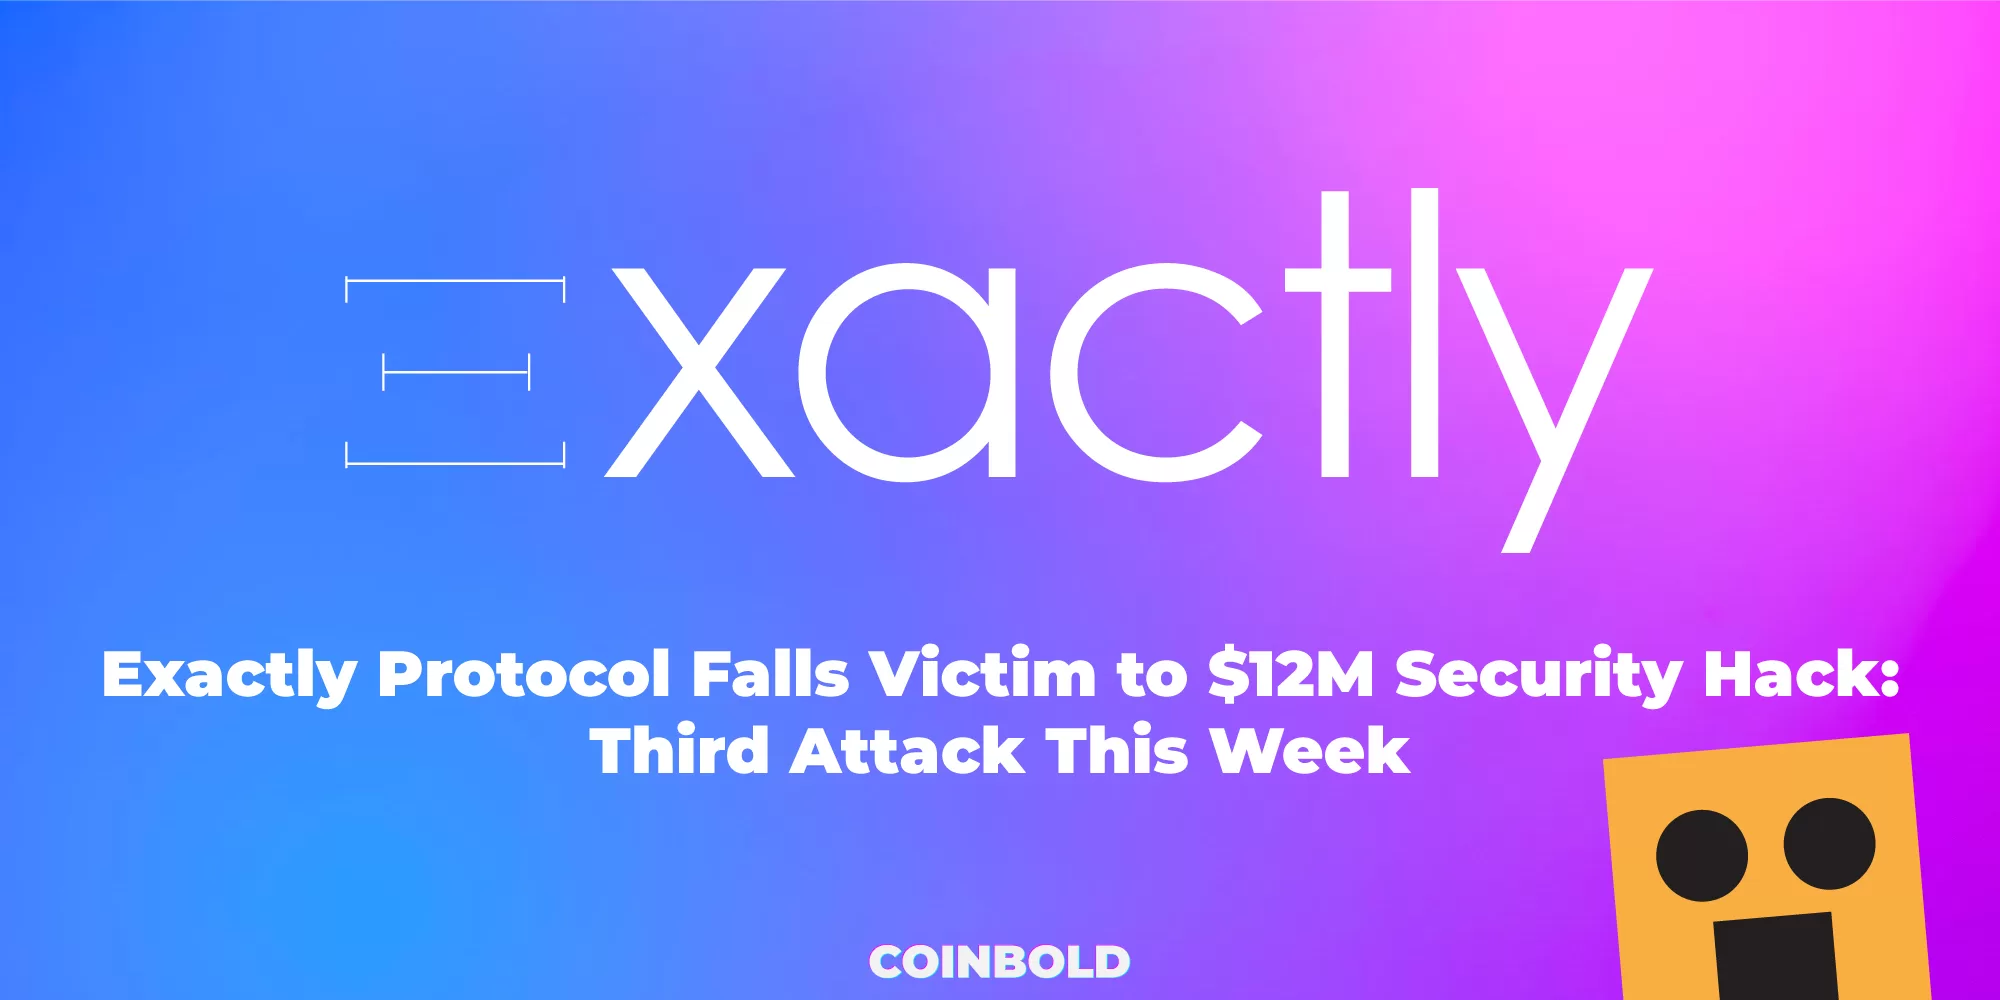 Exactly Protocol Falls Victim to $12M Security Hack Third Attack This Week